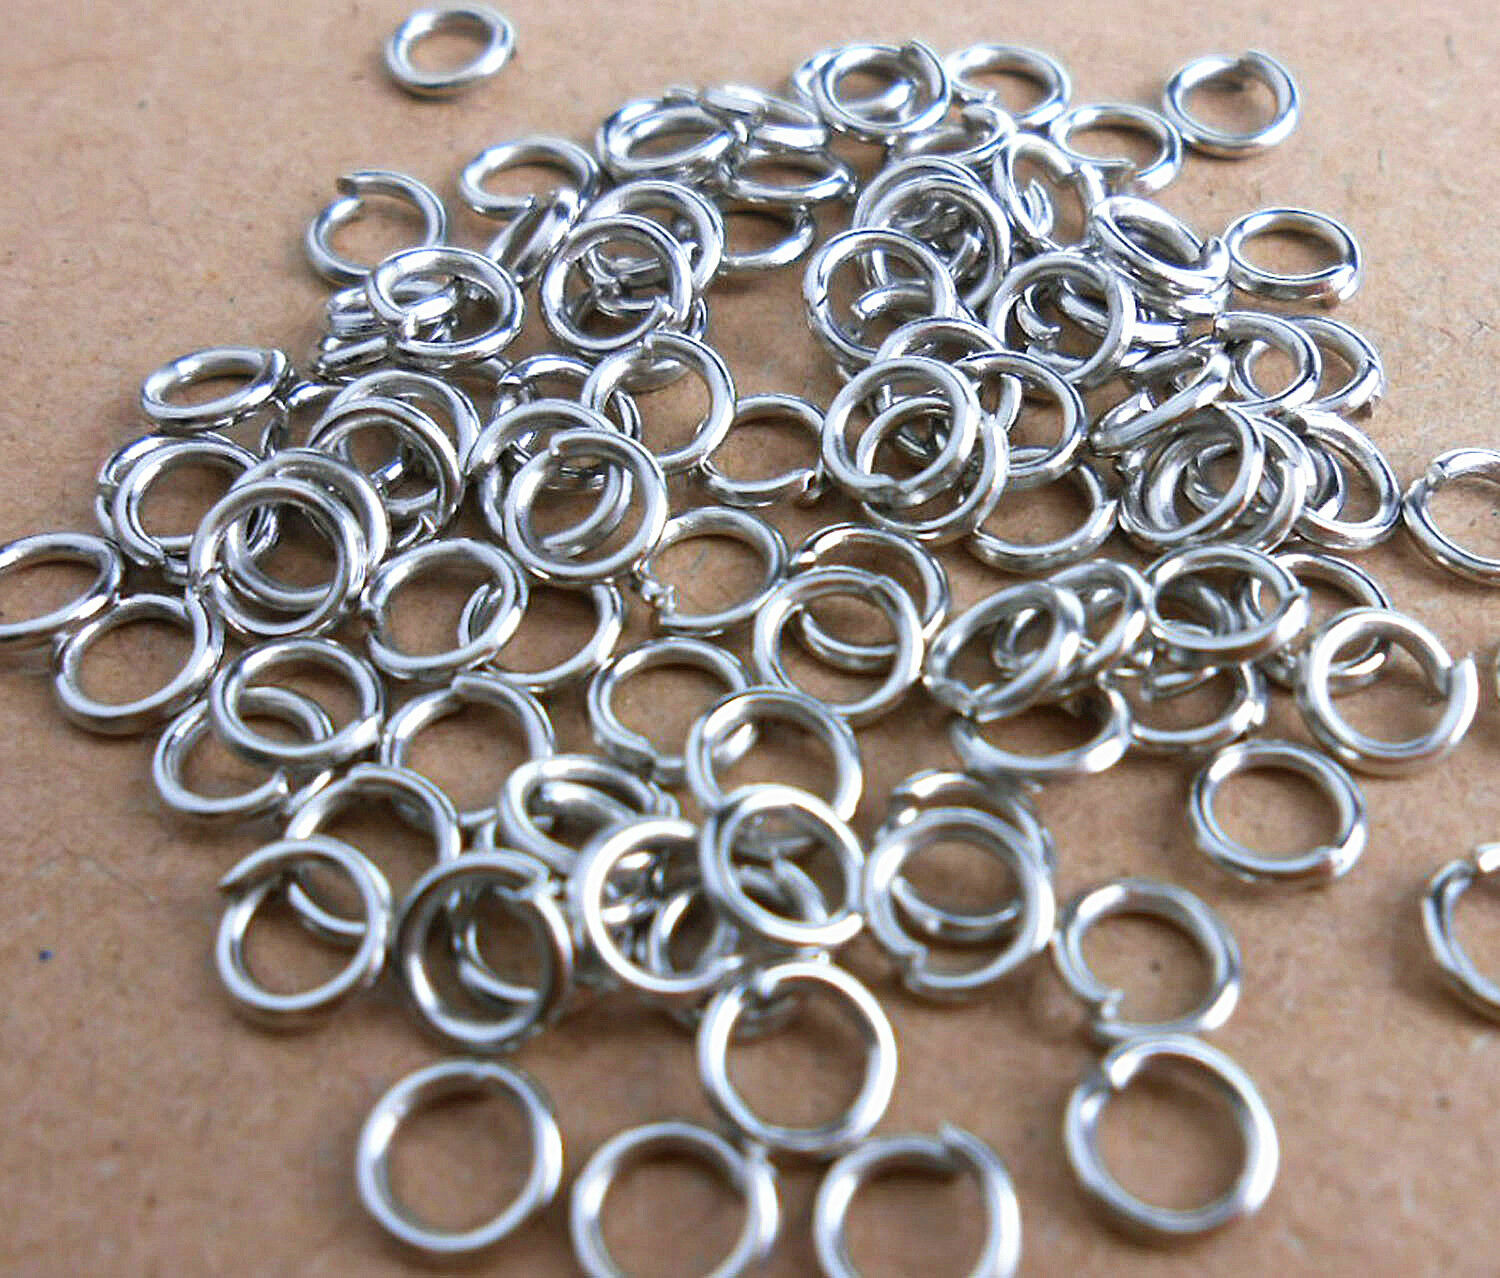 500pcs 3mm-9mm Diy Making Jewelry Findings Stainless Steel Opening Jump Rings